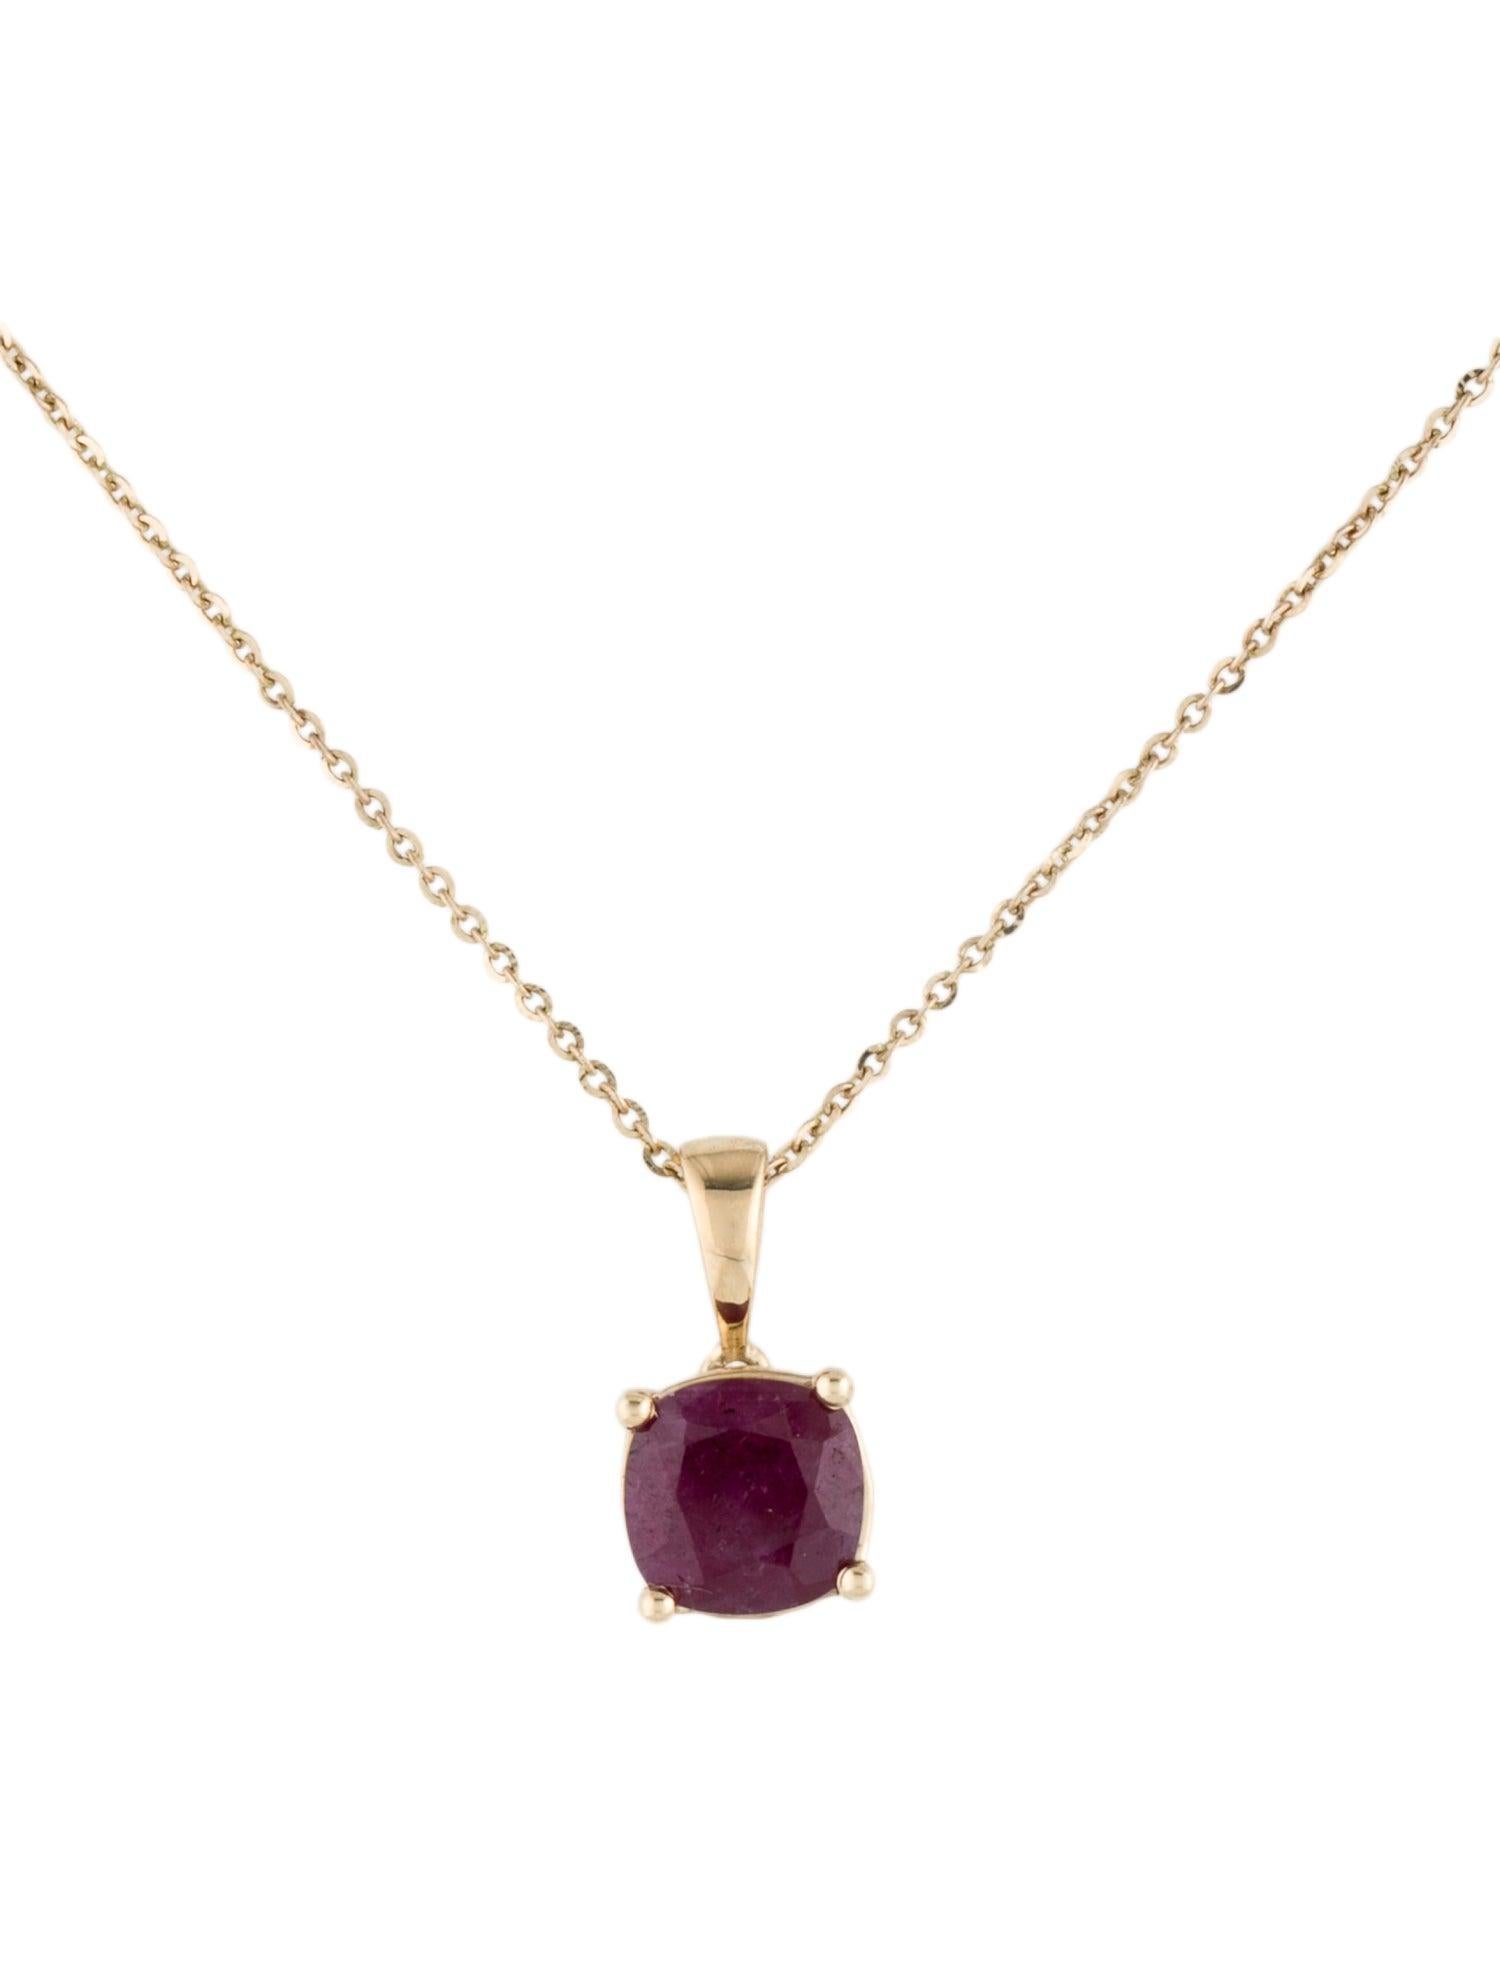 Presenting our exquisite 14K Yellow Gold Ruby Pendant Necklace, a masterpiece that epitomizes luxury and elegance. This stunning piece features a 1.56 carat Cushion Brilliant Ruby, meticulously set in the warm hues of 14K yellow gold. Sized at an